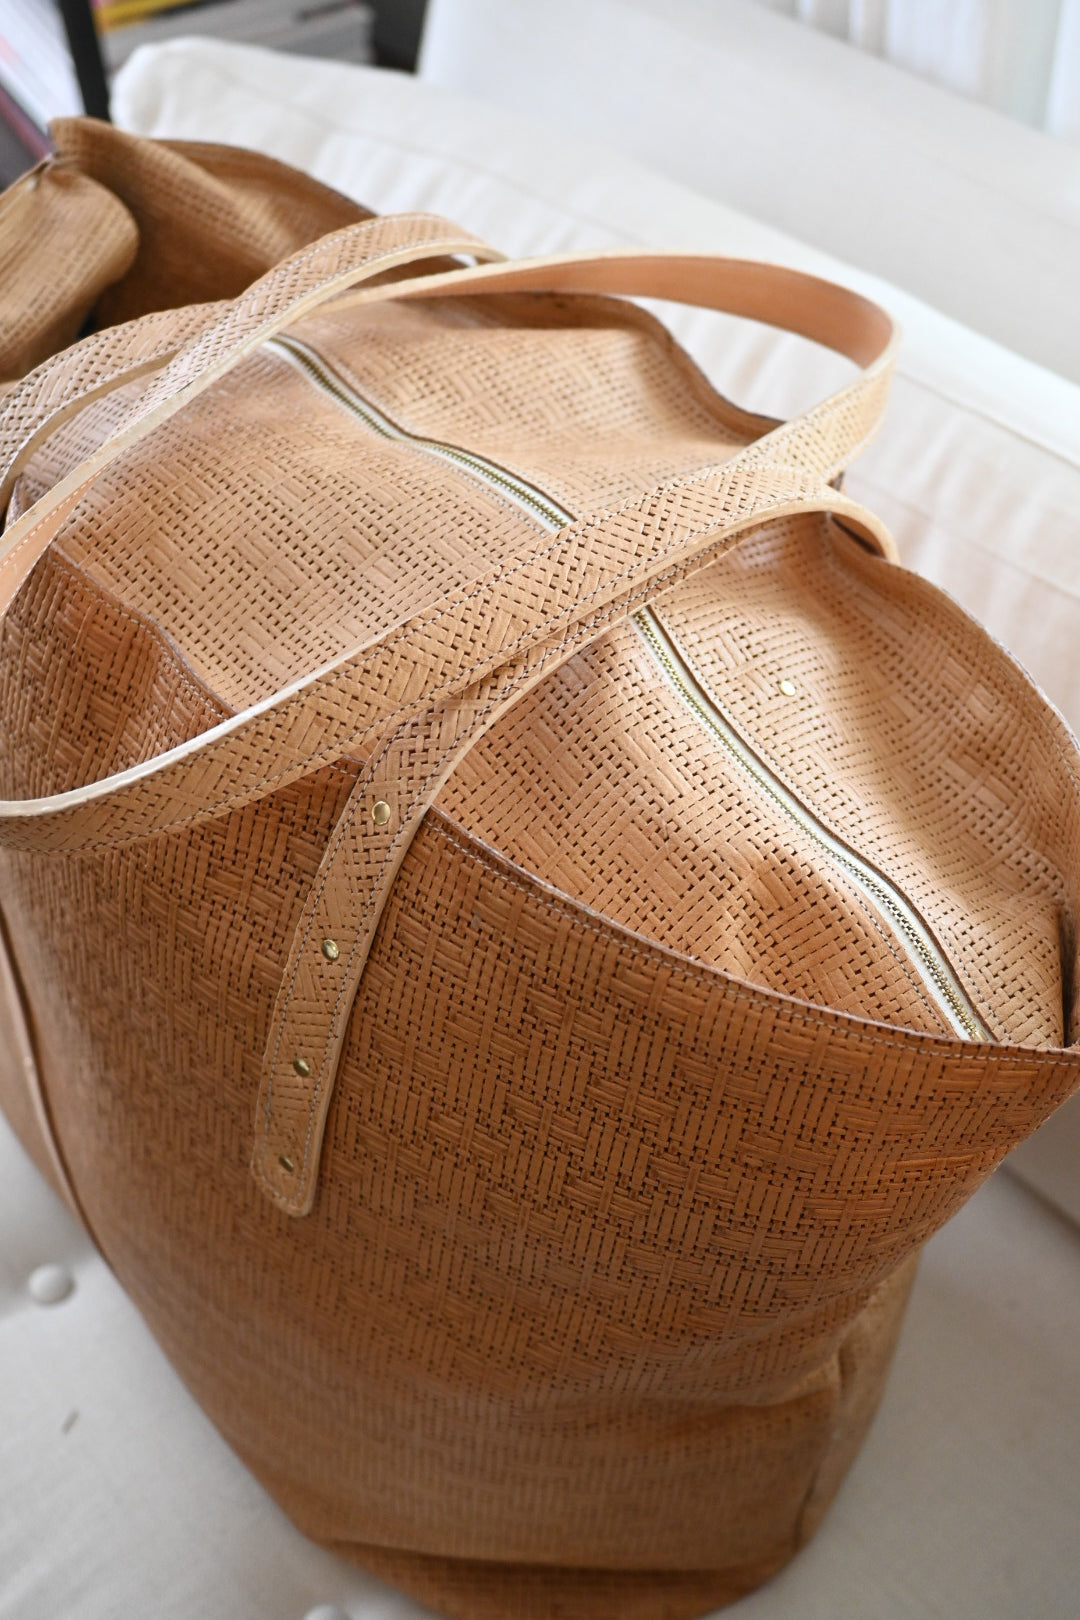 Up close to the Weaved Leather Weekender Tote in Beige 